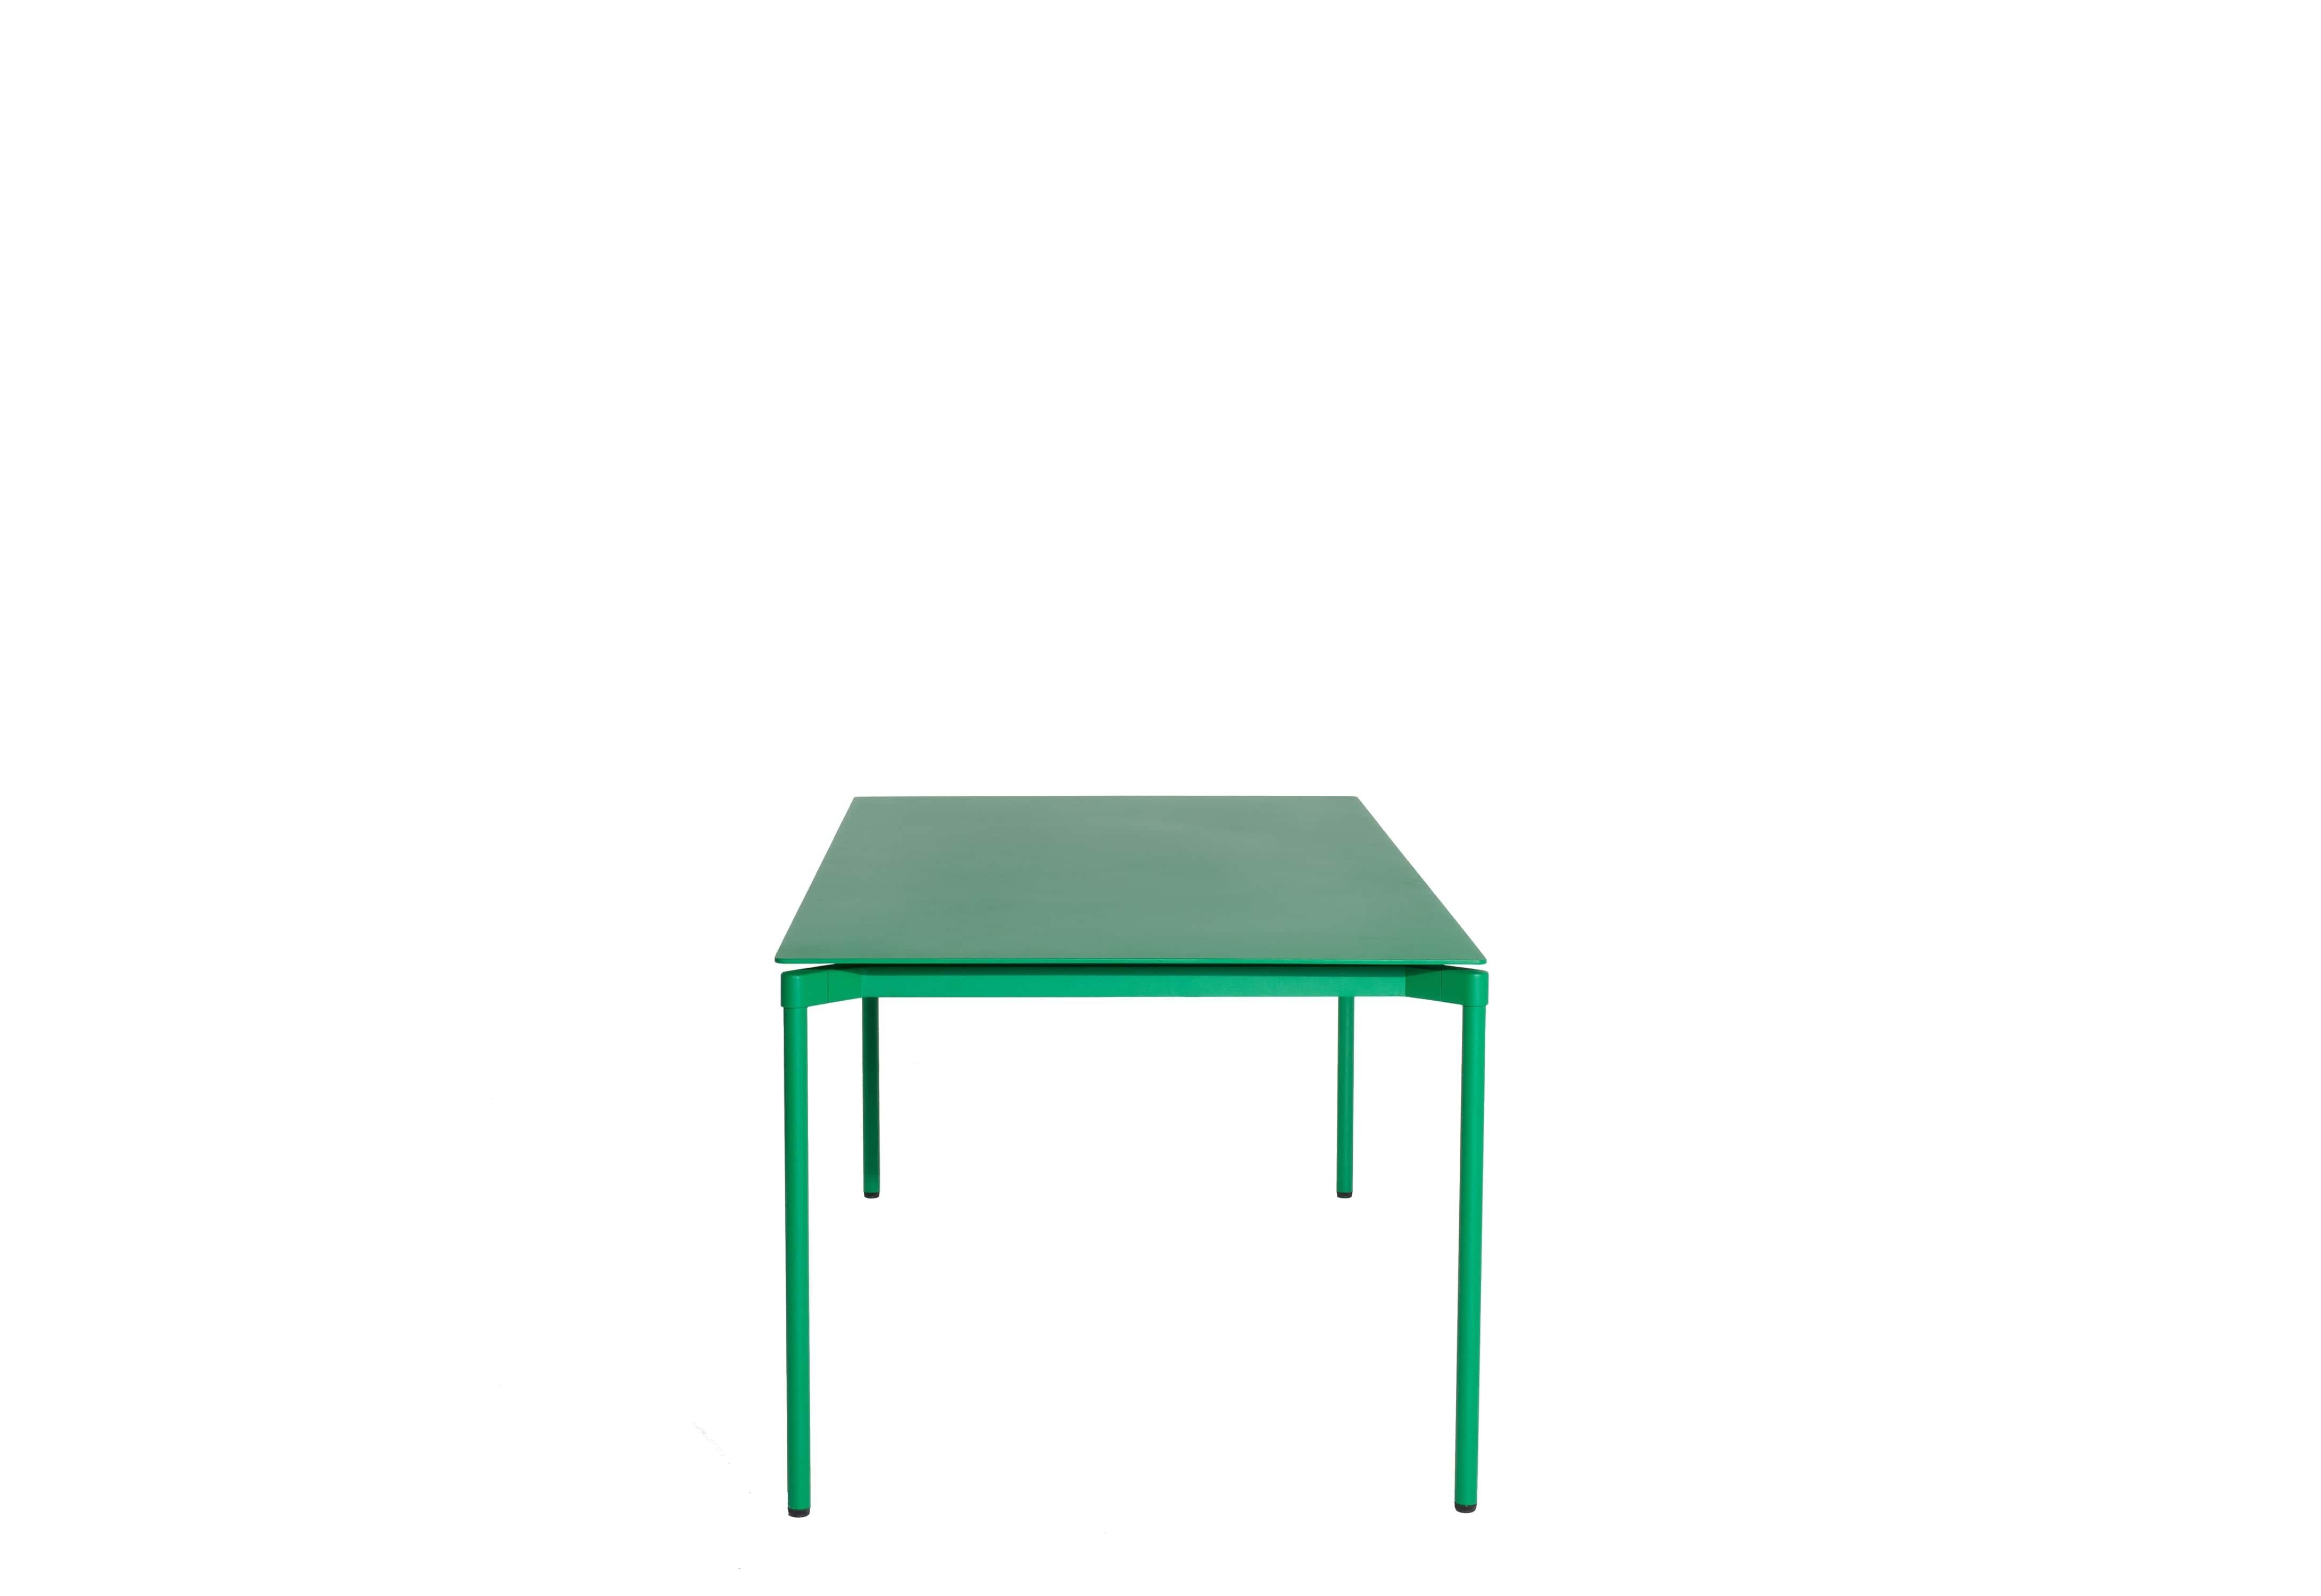 Chinese Petite Friture Fromme Rectangular Table in Mint-Green Aluminium by Tom Chung For Sale